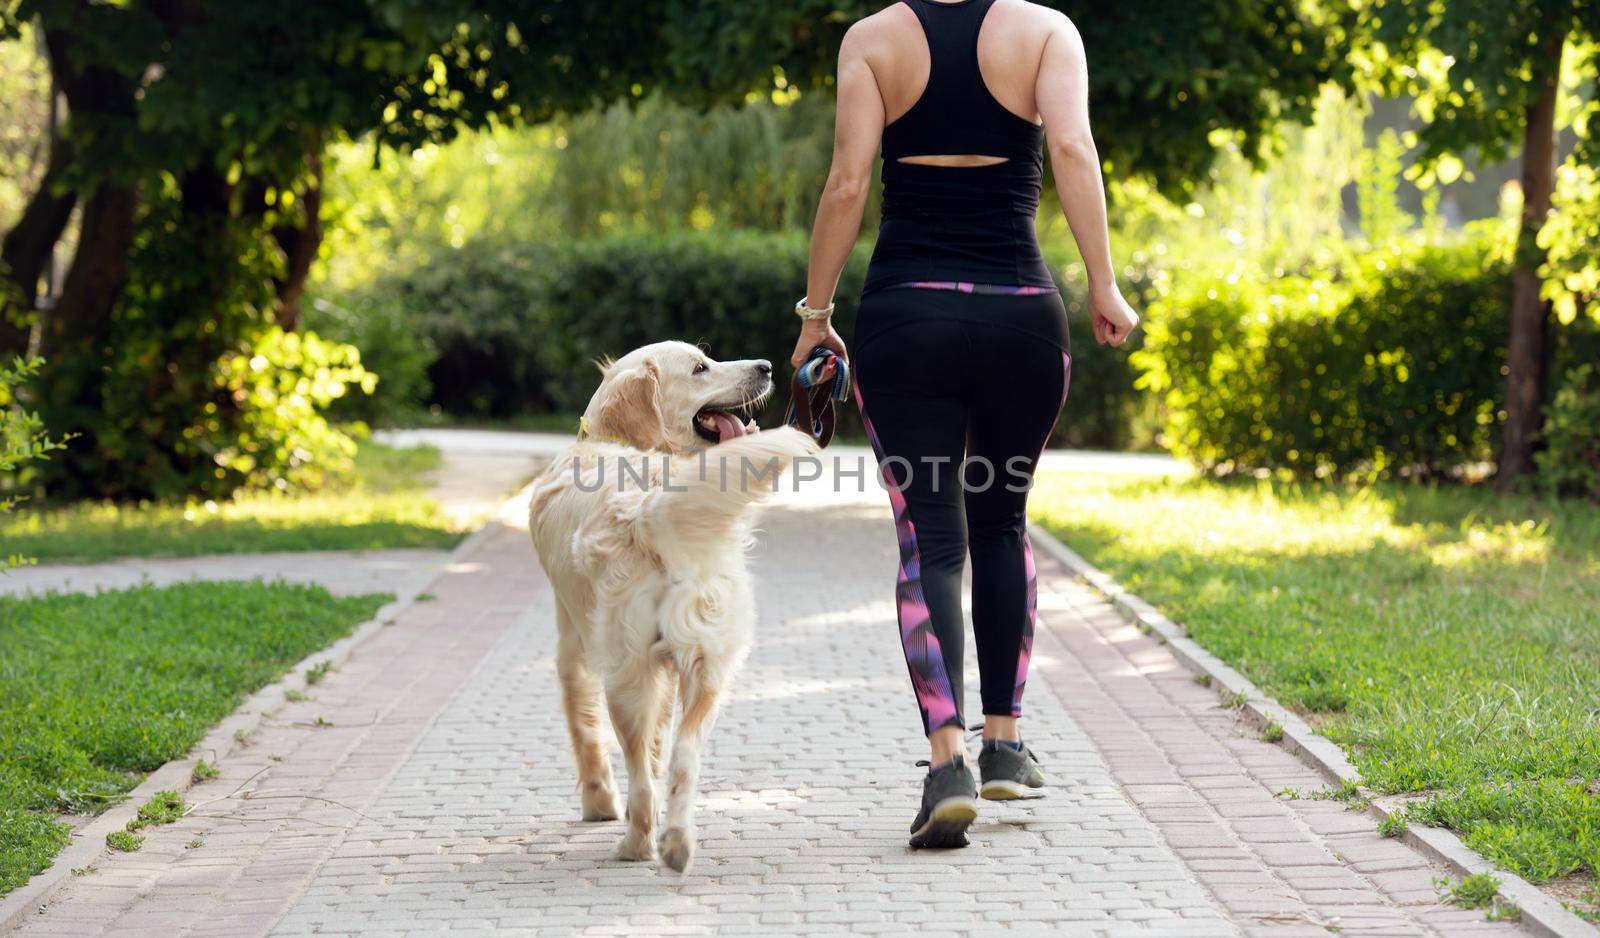 Sport girl running with golden retriever dog outdoors view from back. Young woman jogging with doggy pet in summertime